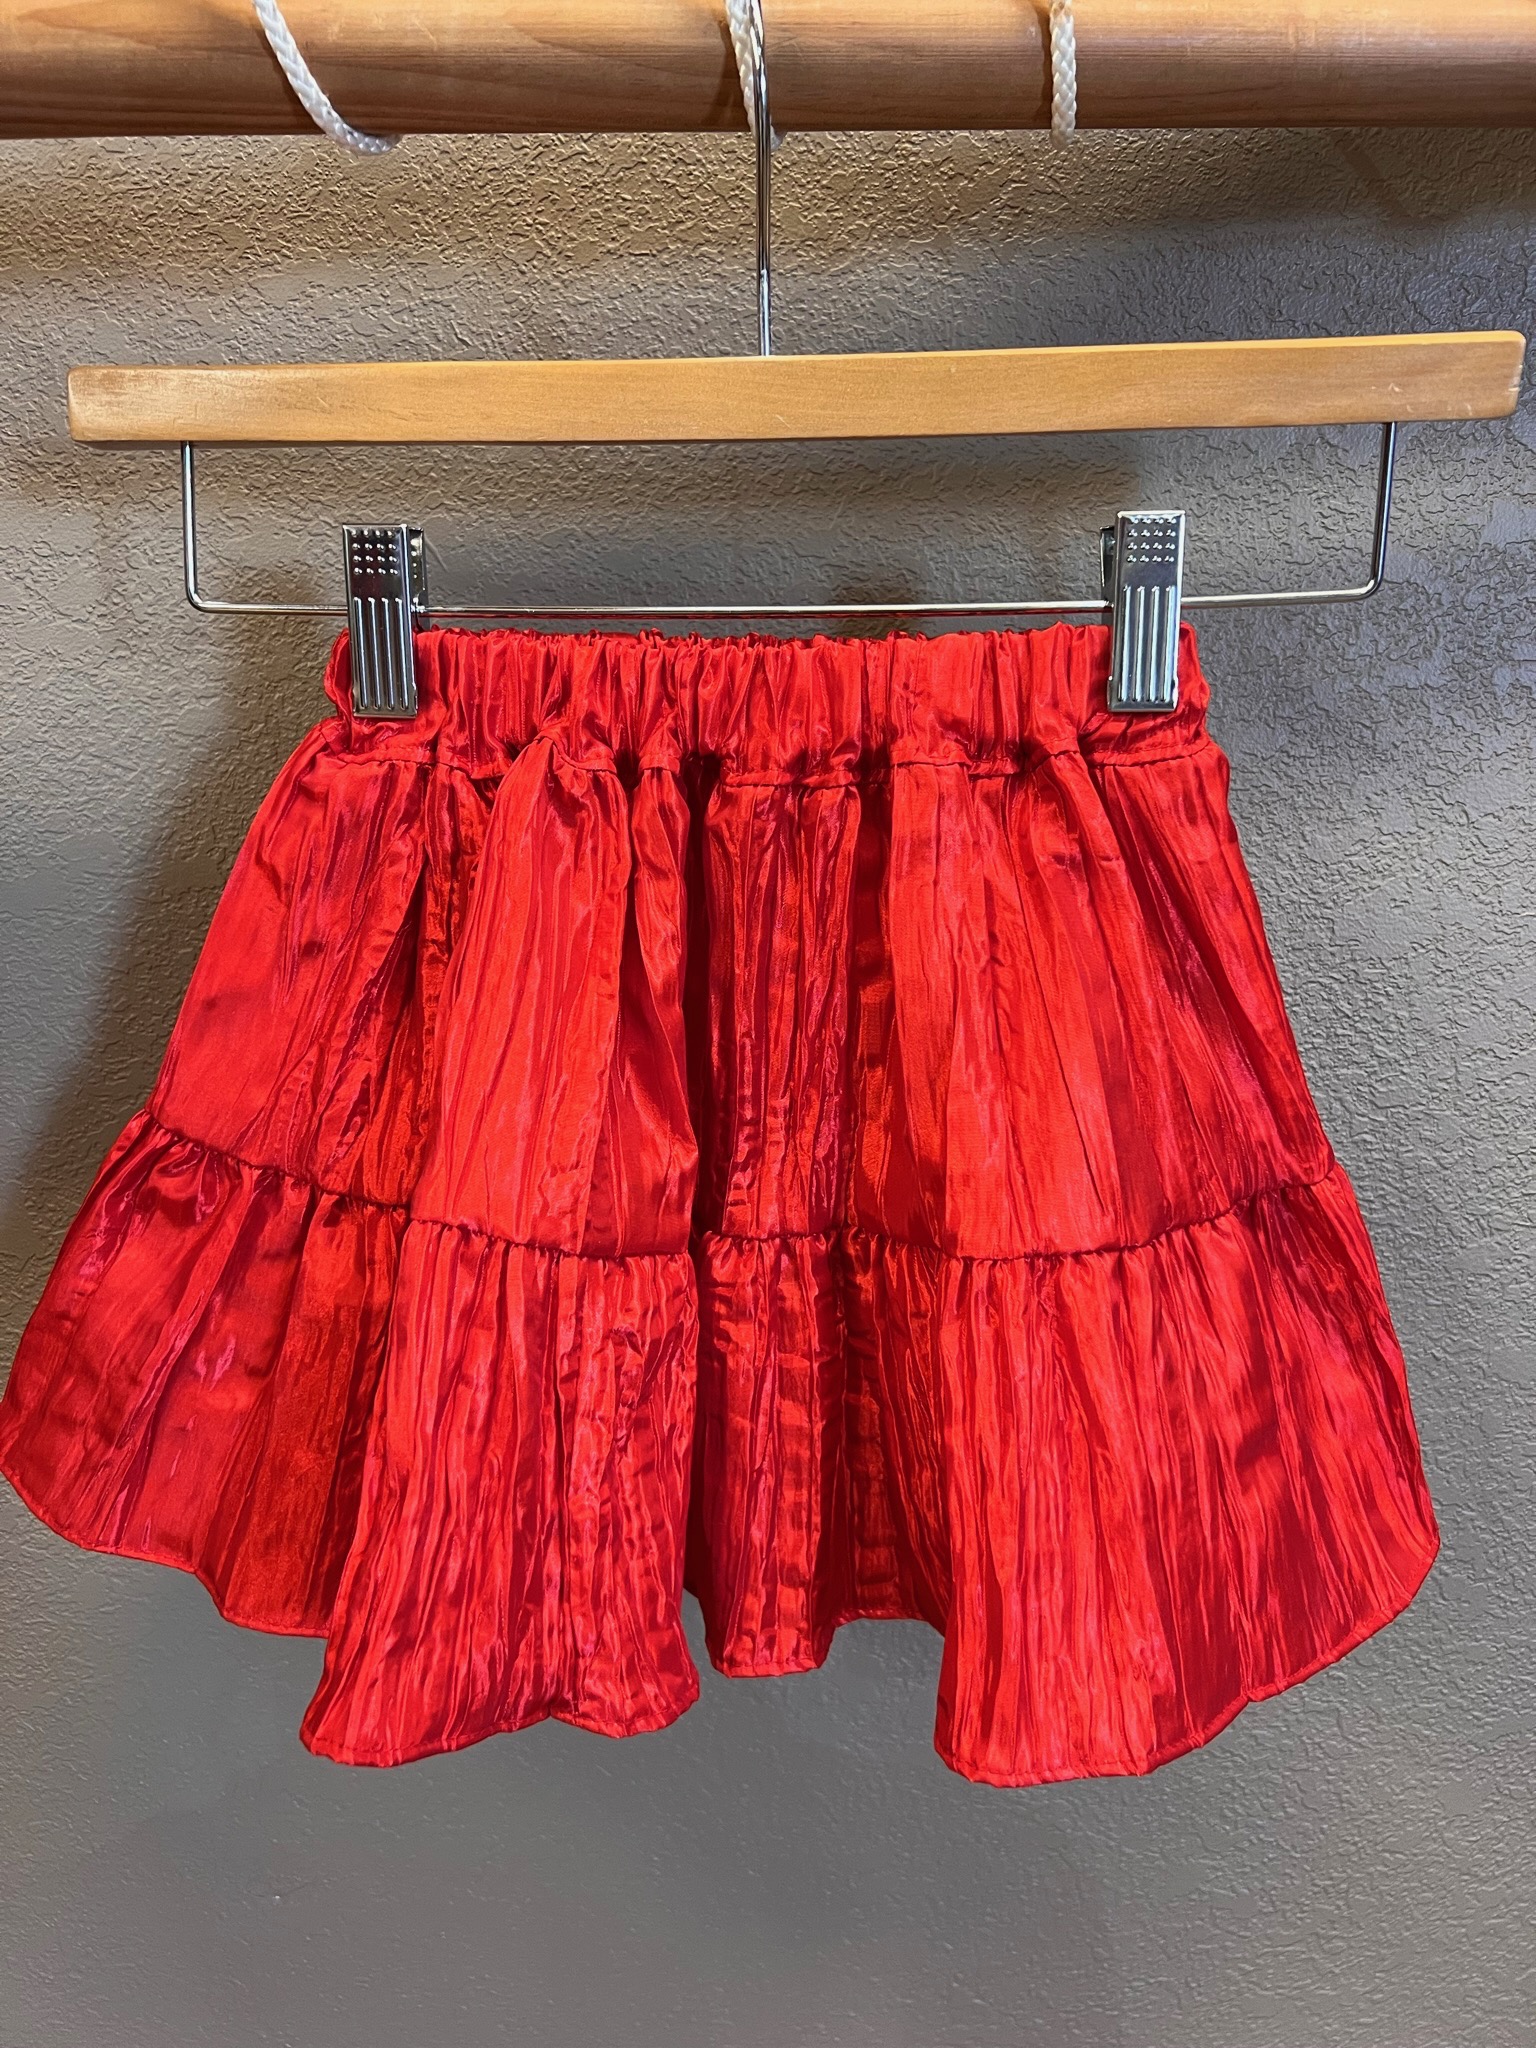 Childs Crushed Satin Skirt Red